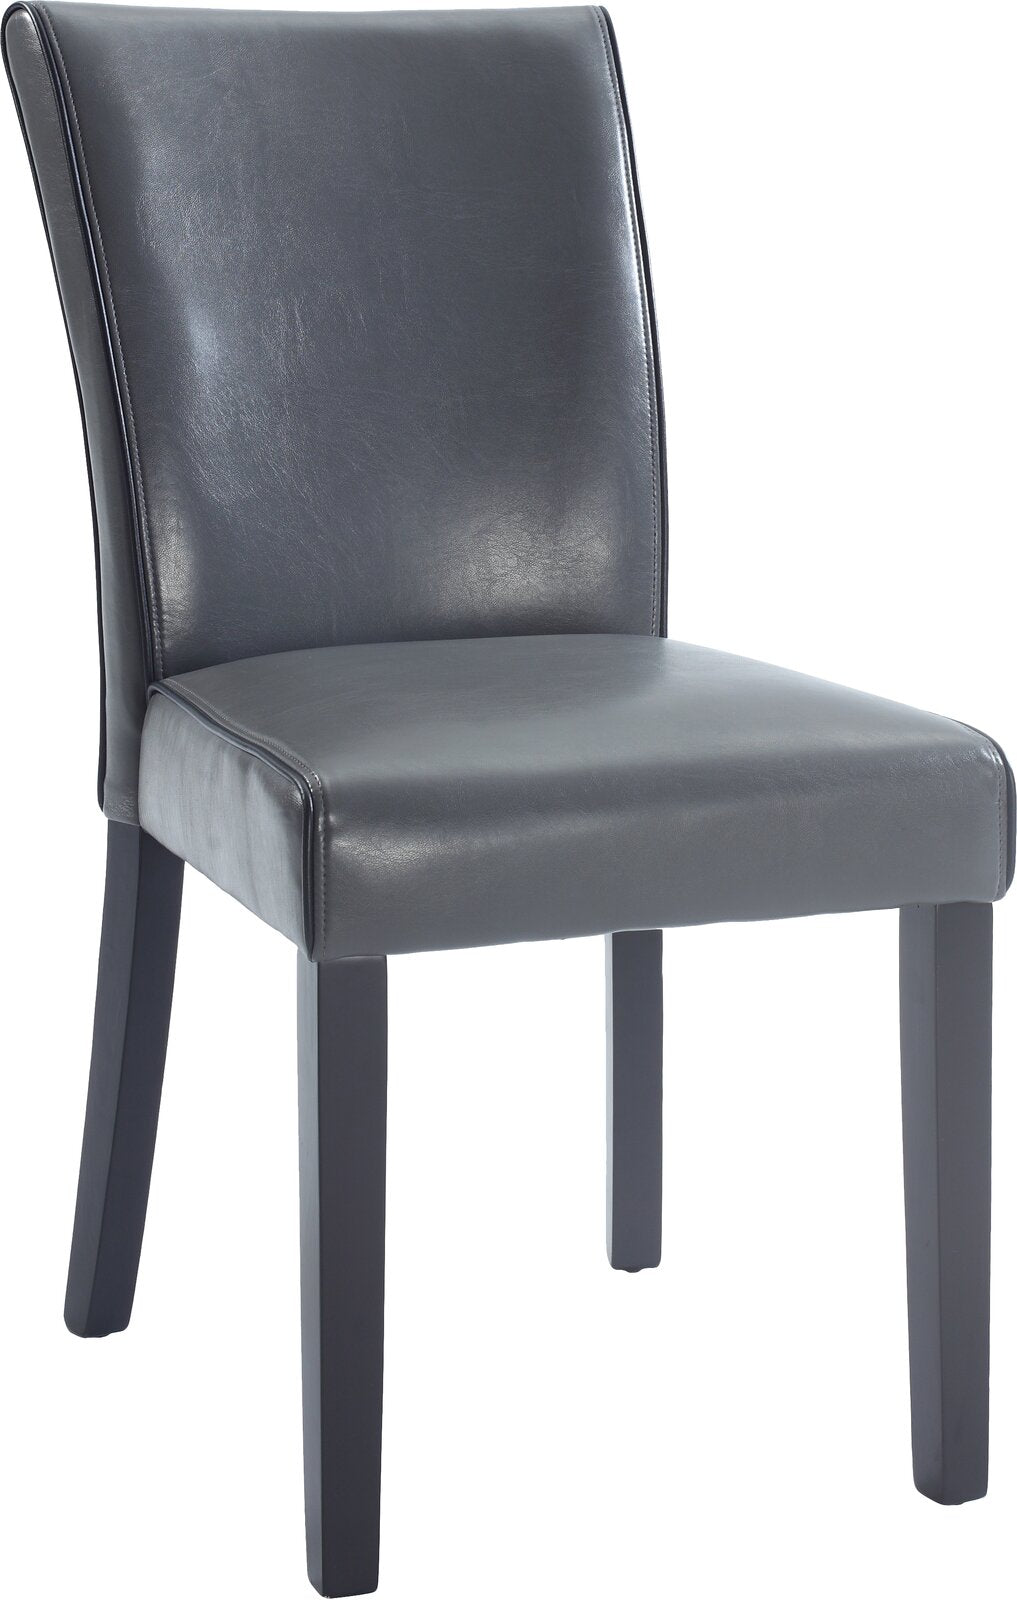 Powell Upholstered Dining Chair K7646